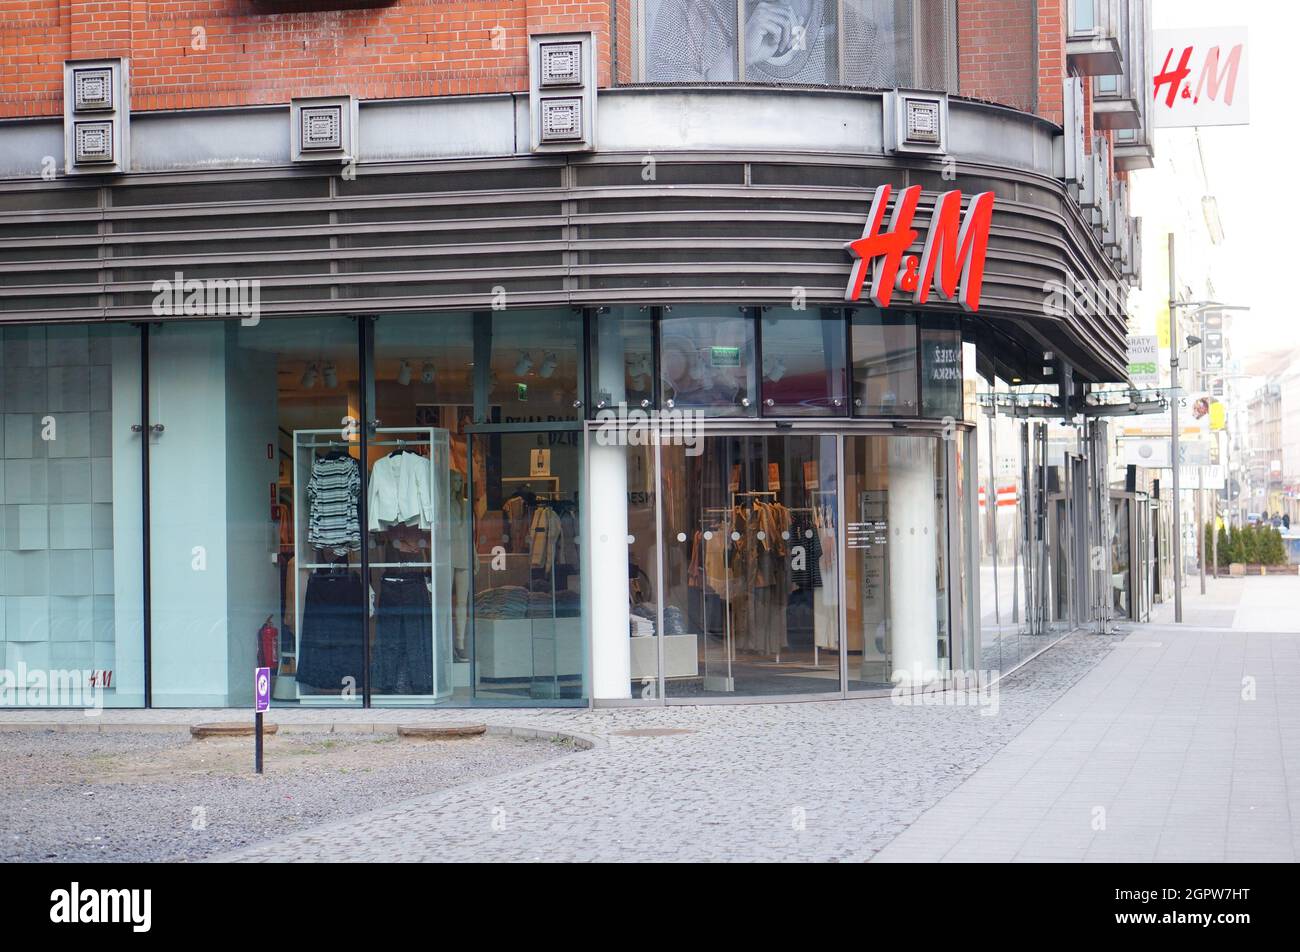 POZNAN, POLAND - Mar 08, 2015: the Entrance to a H&M clothing store in the  city on a gloomy day Stock Photo - Alamy